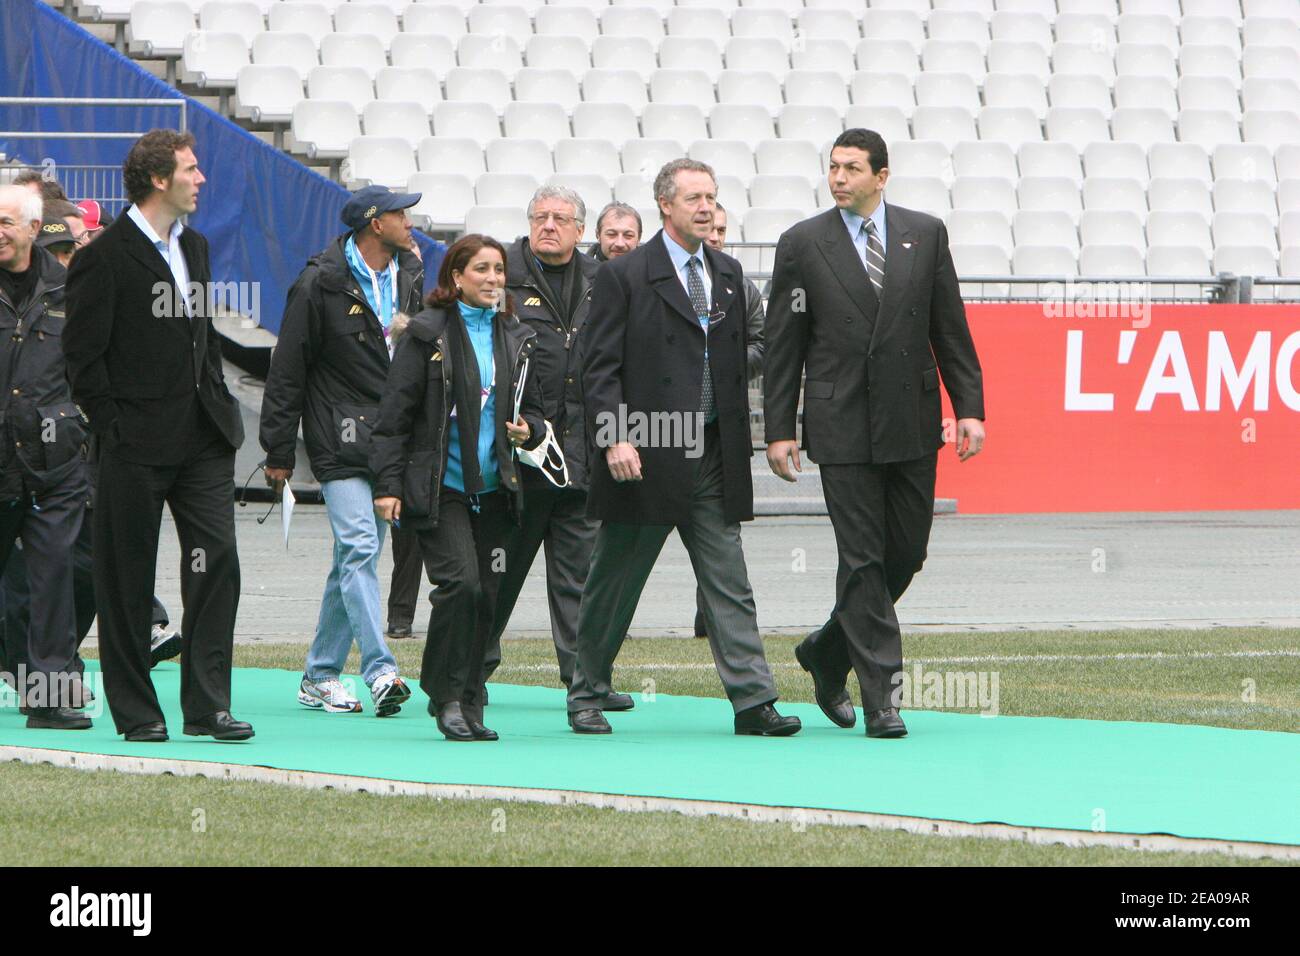 (l to r) Laurent Blanc, Nawal El Moutawakel, Guy Drut and Abdelatif Benazzi during the visit of the Stade de France by the IOC delegation in Saint Denisnear Paris, France, on March 10, 2005. Photo by Mousse/ABACA. Stock Photo